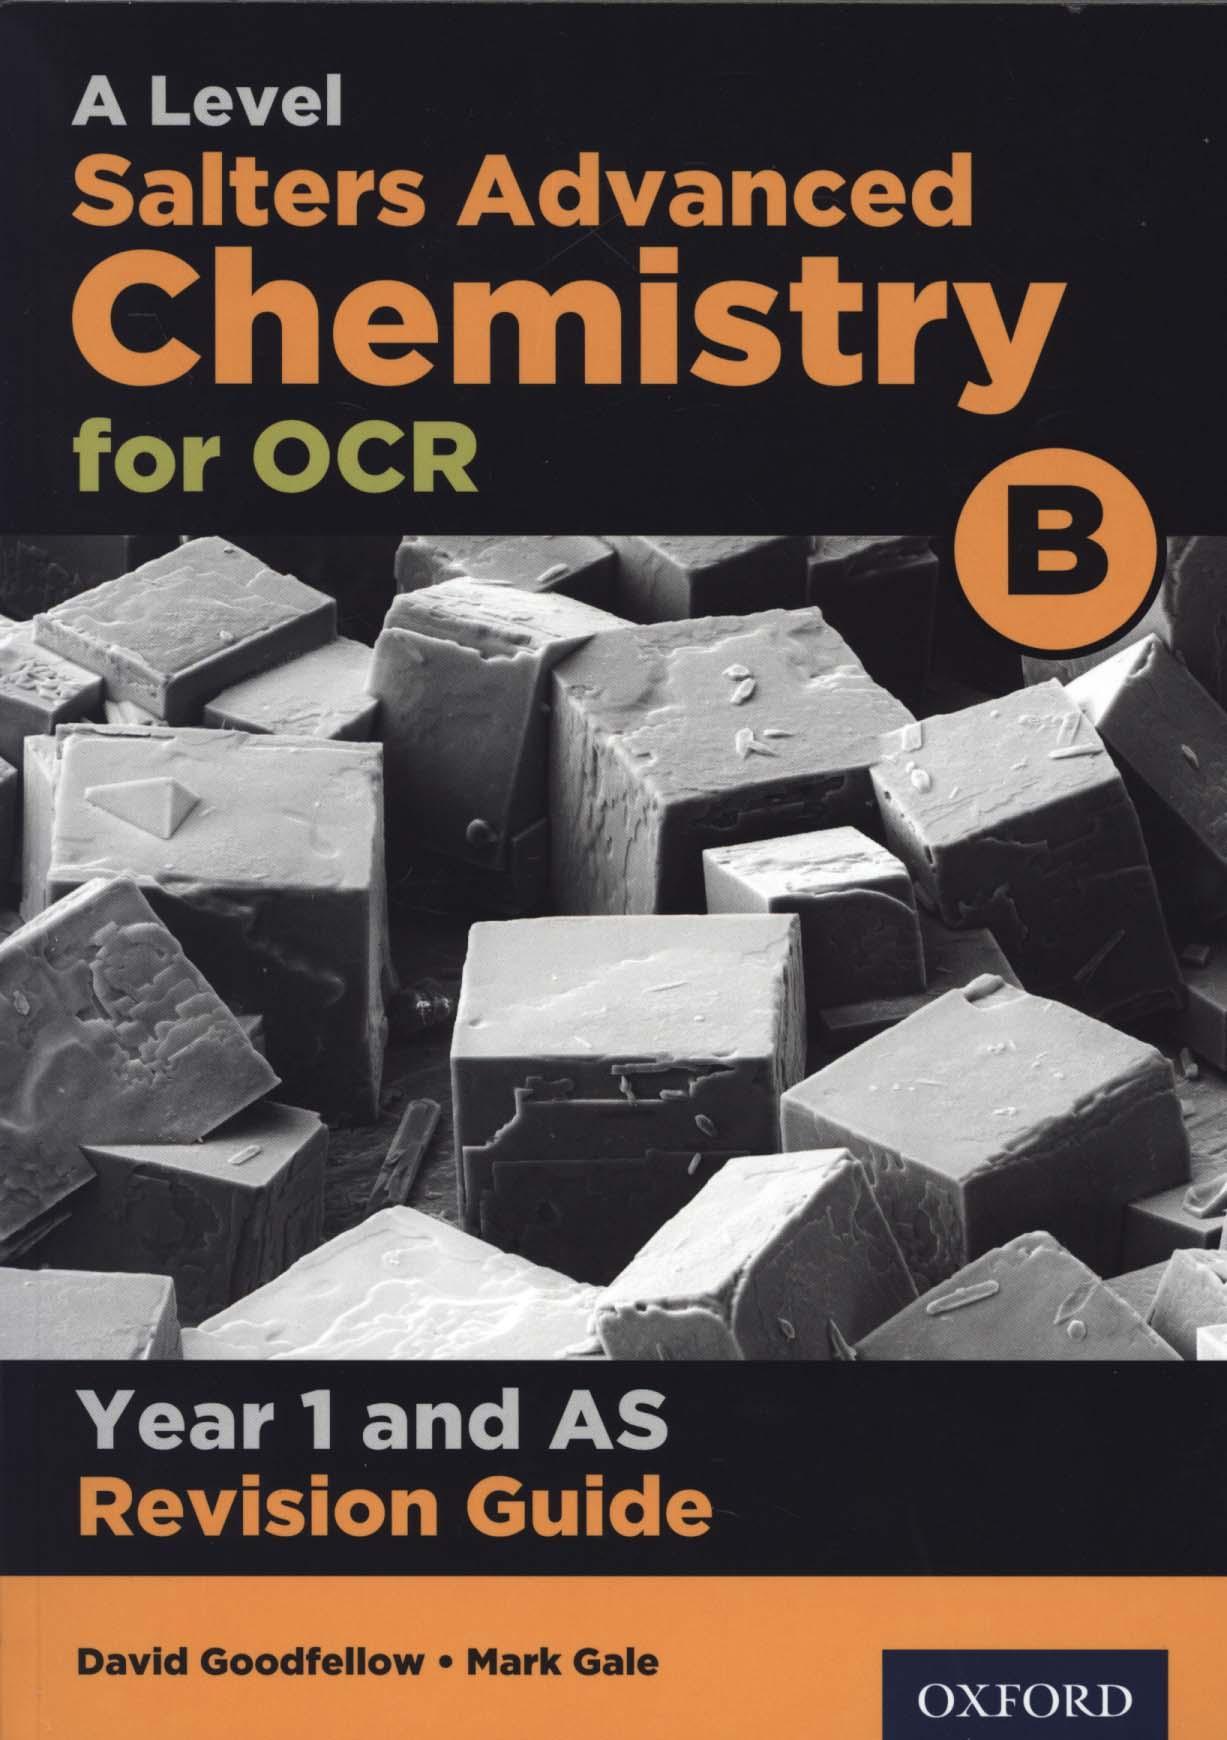 OCR A Level Salters' Advanced Chemistry Year 1 Revision Guid